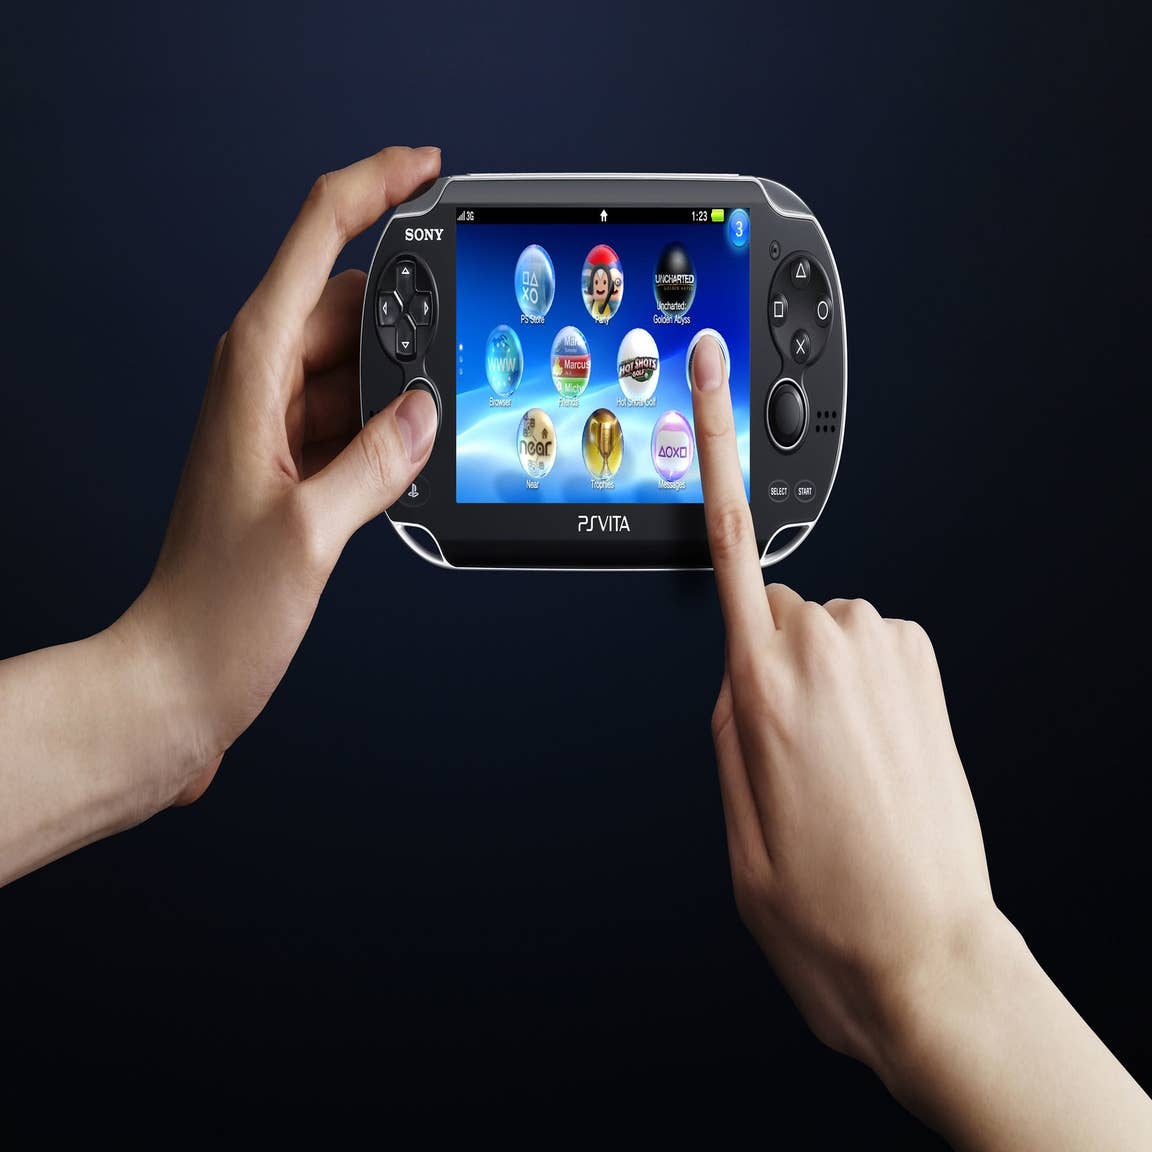 Things PS Vita Did Better Than Most Other Handheld Consoles